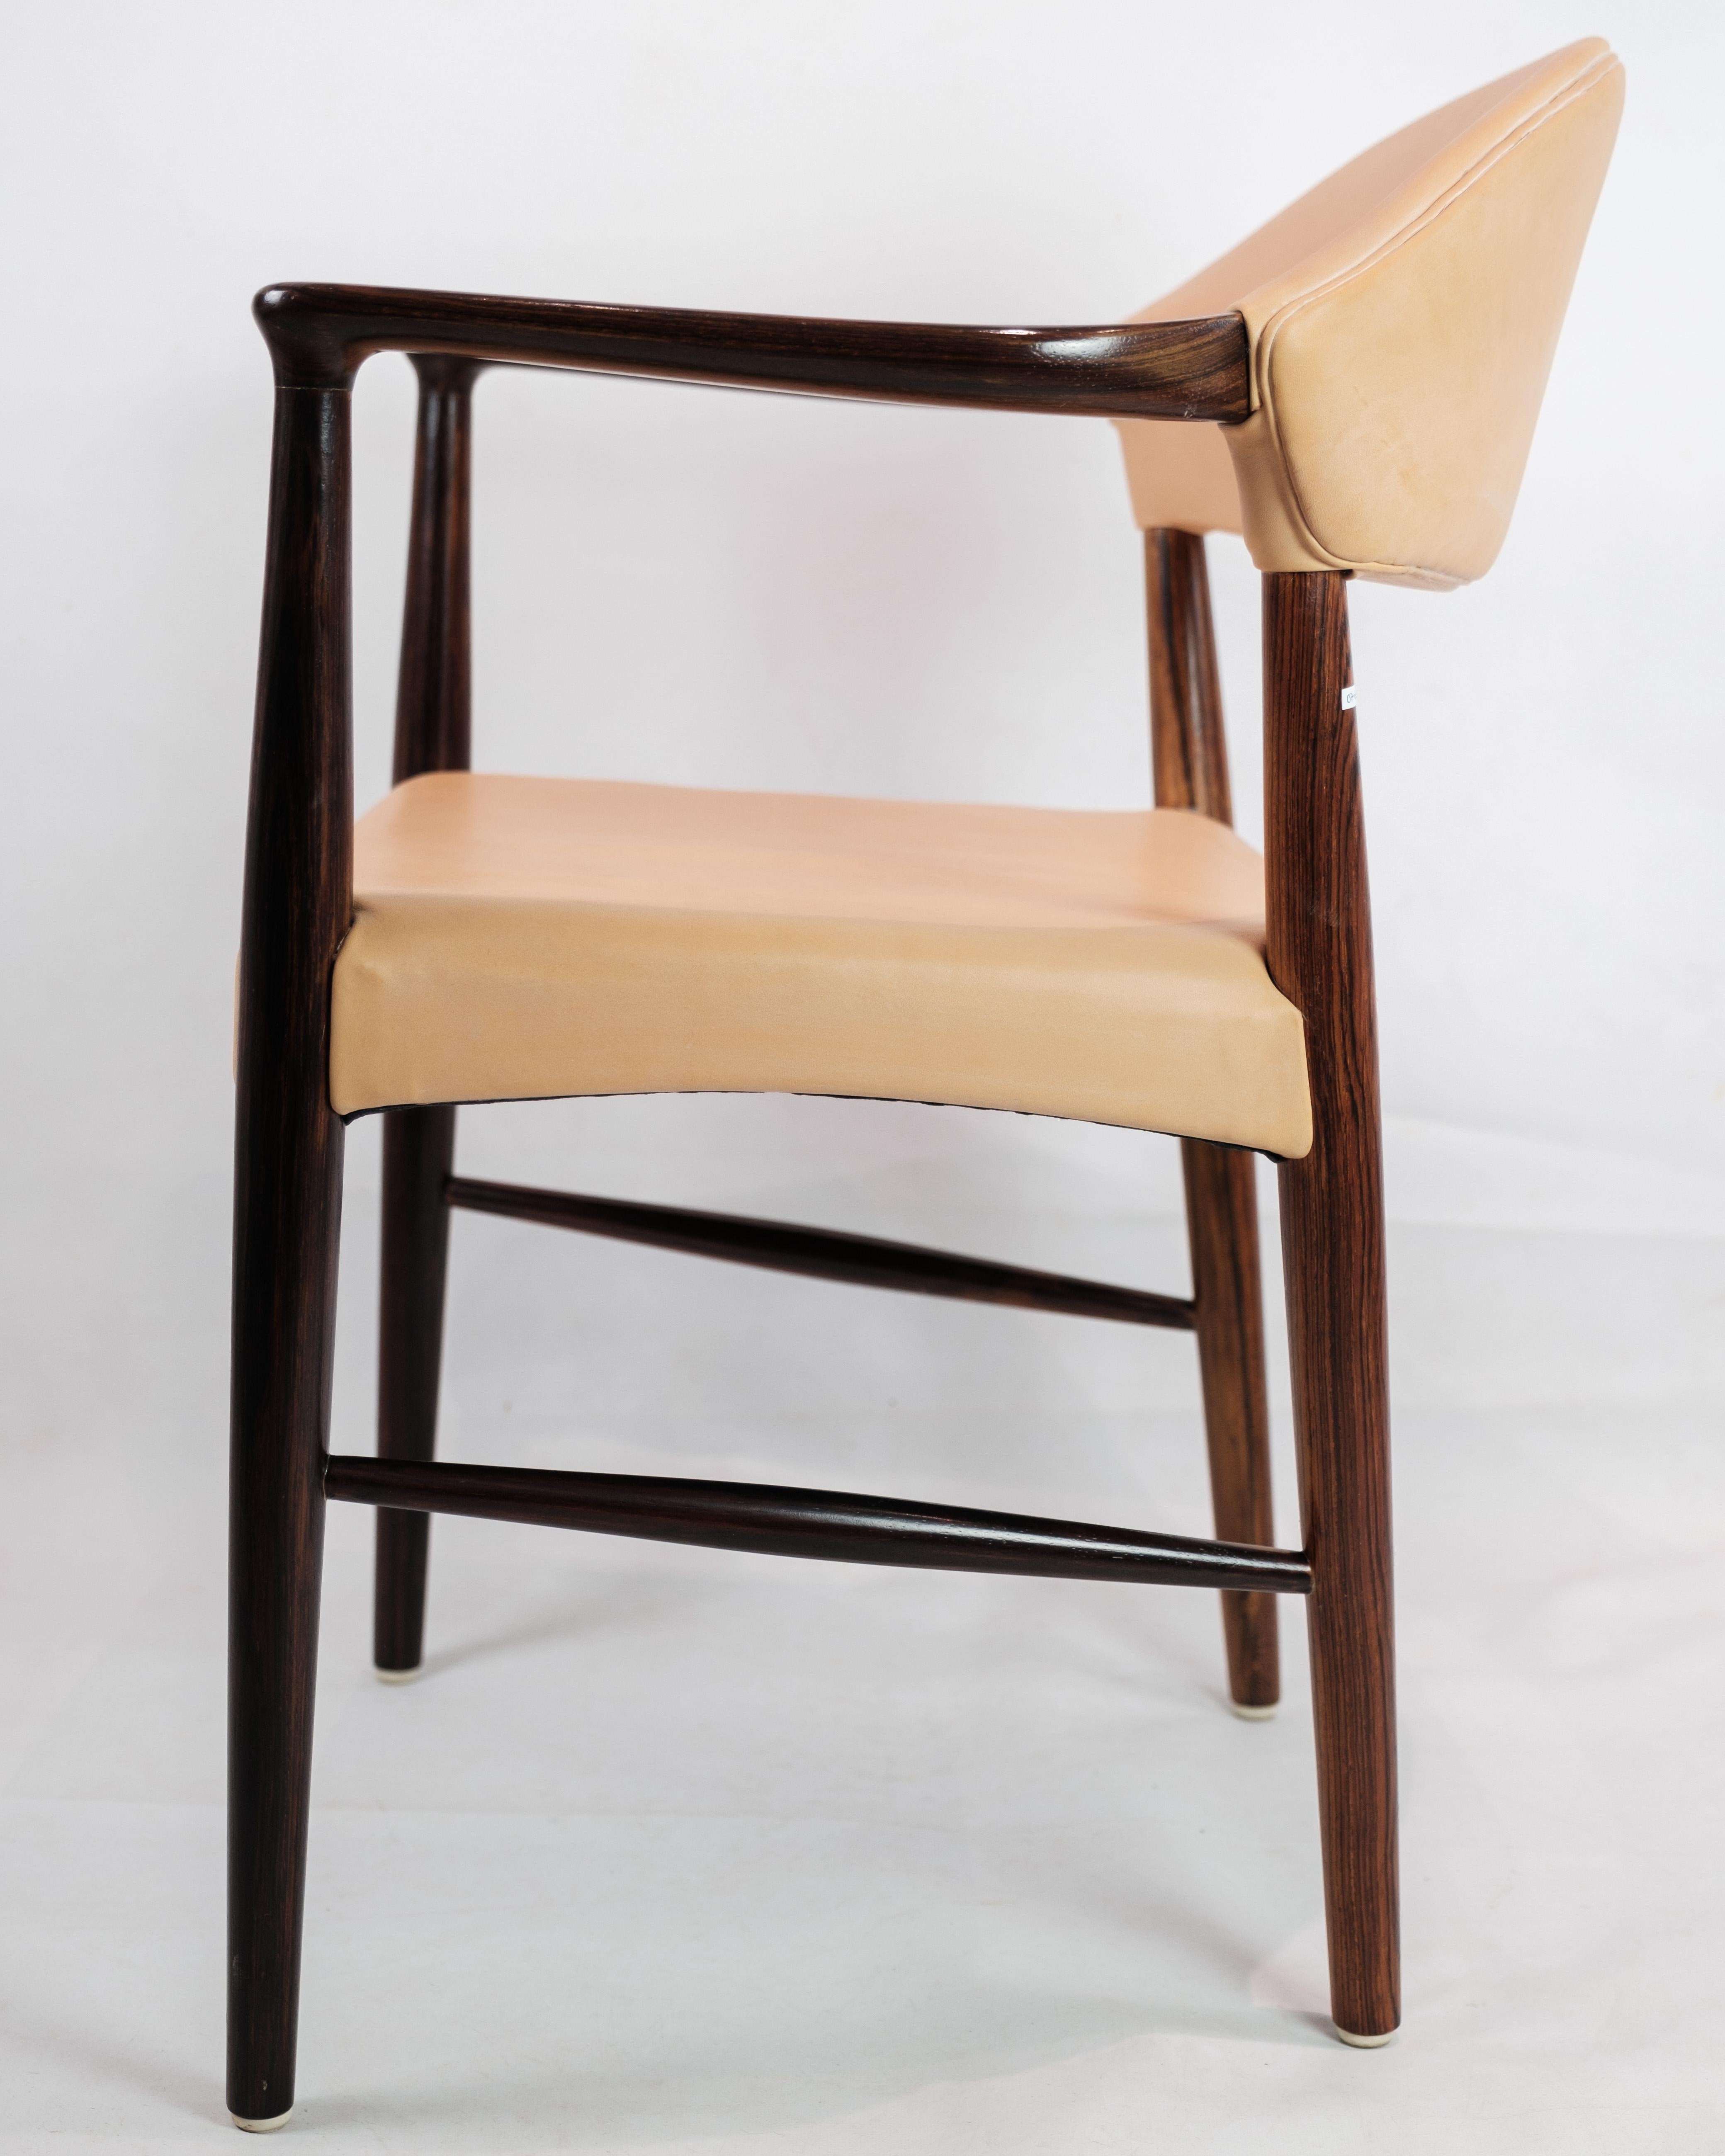 Mid-20th Century Desk Chair Made In Rosewood By Kurt Olsen From 1960s For Sale